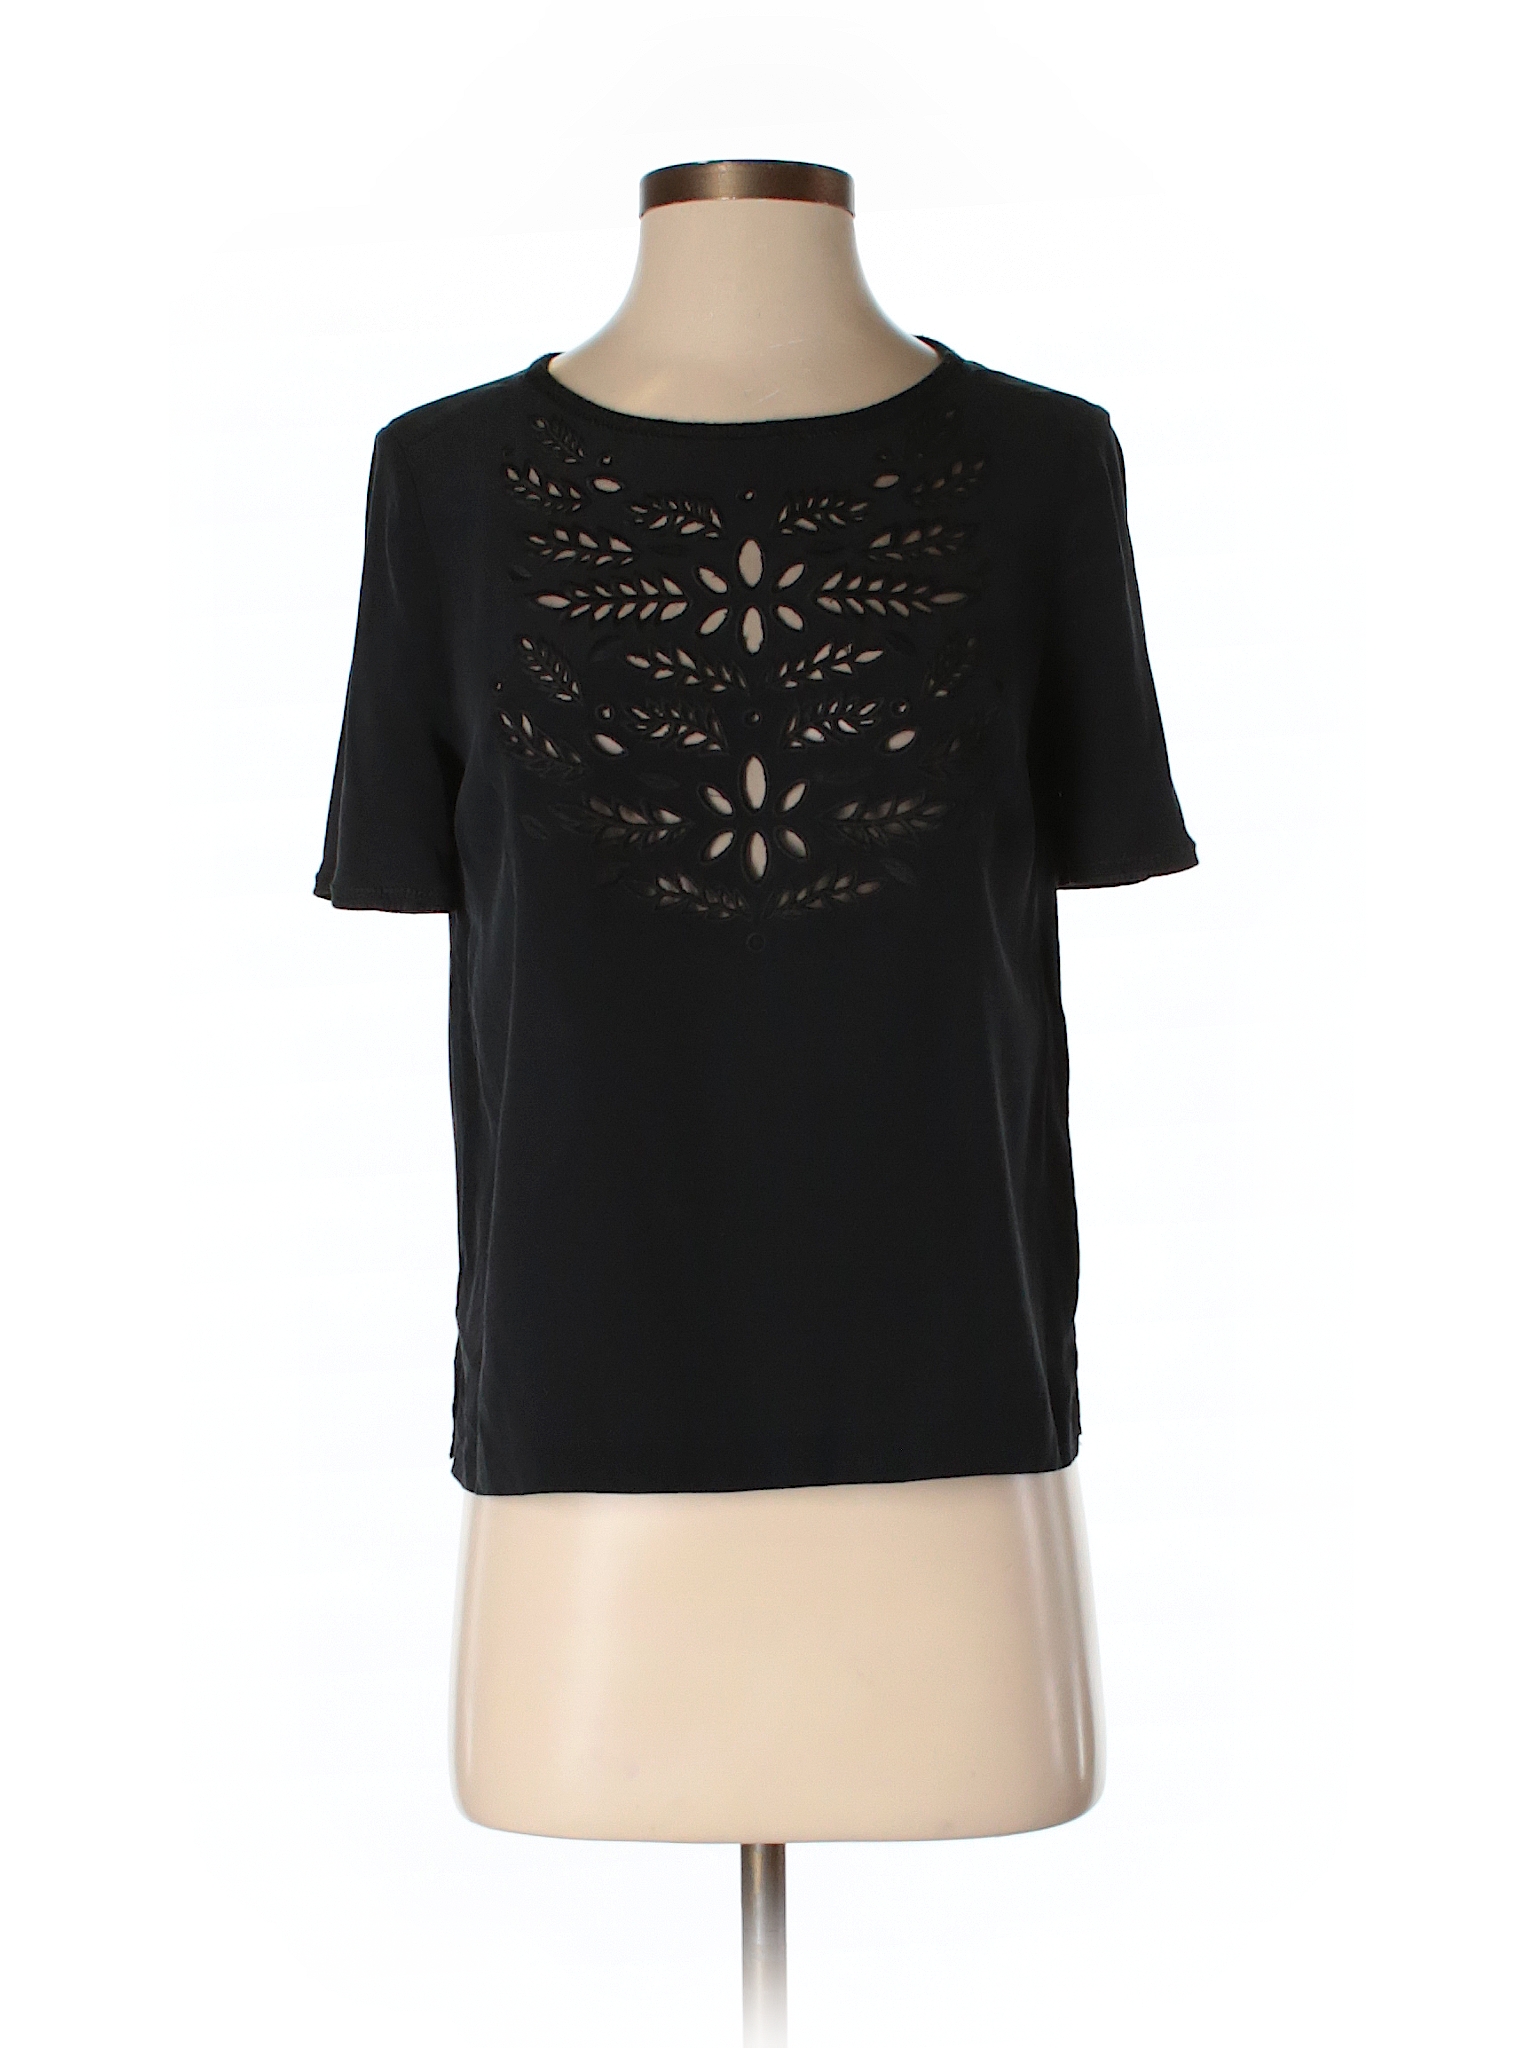 Madewell 100% Silk Solid Black Short Sleeve Silk Top Size S - 73% off ...